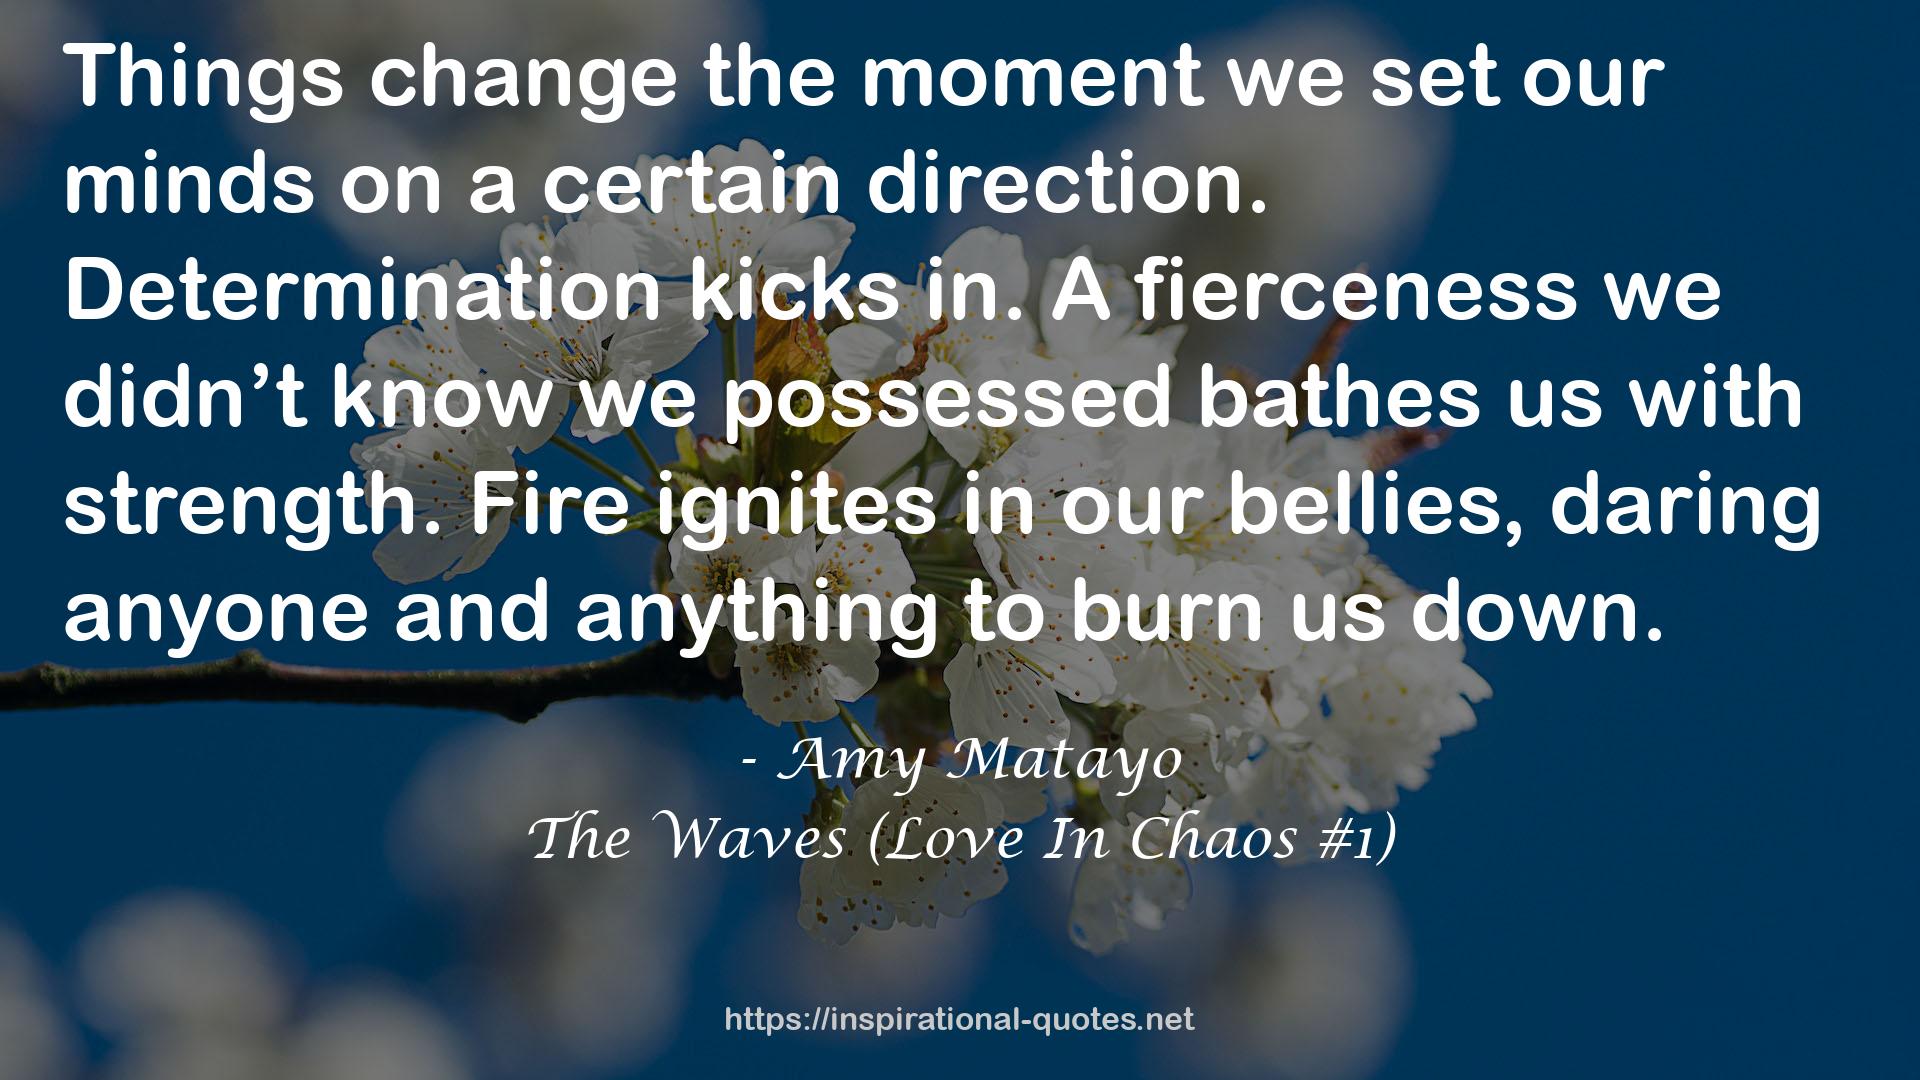 The Waves (Love In Chaos #1) QUOTES